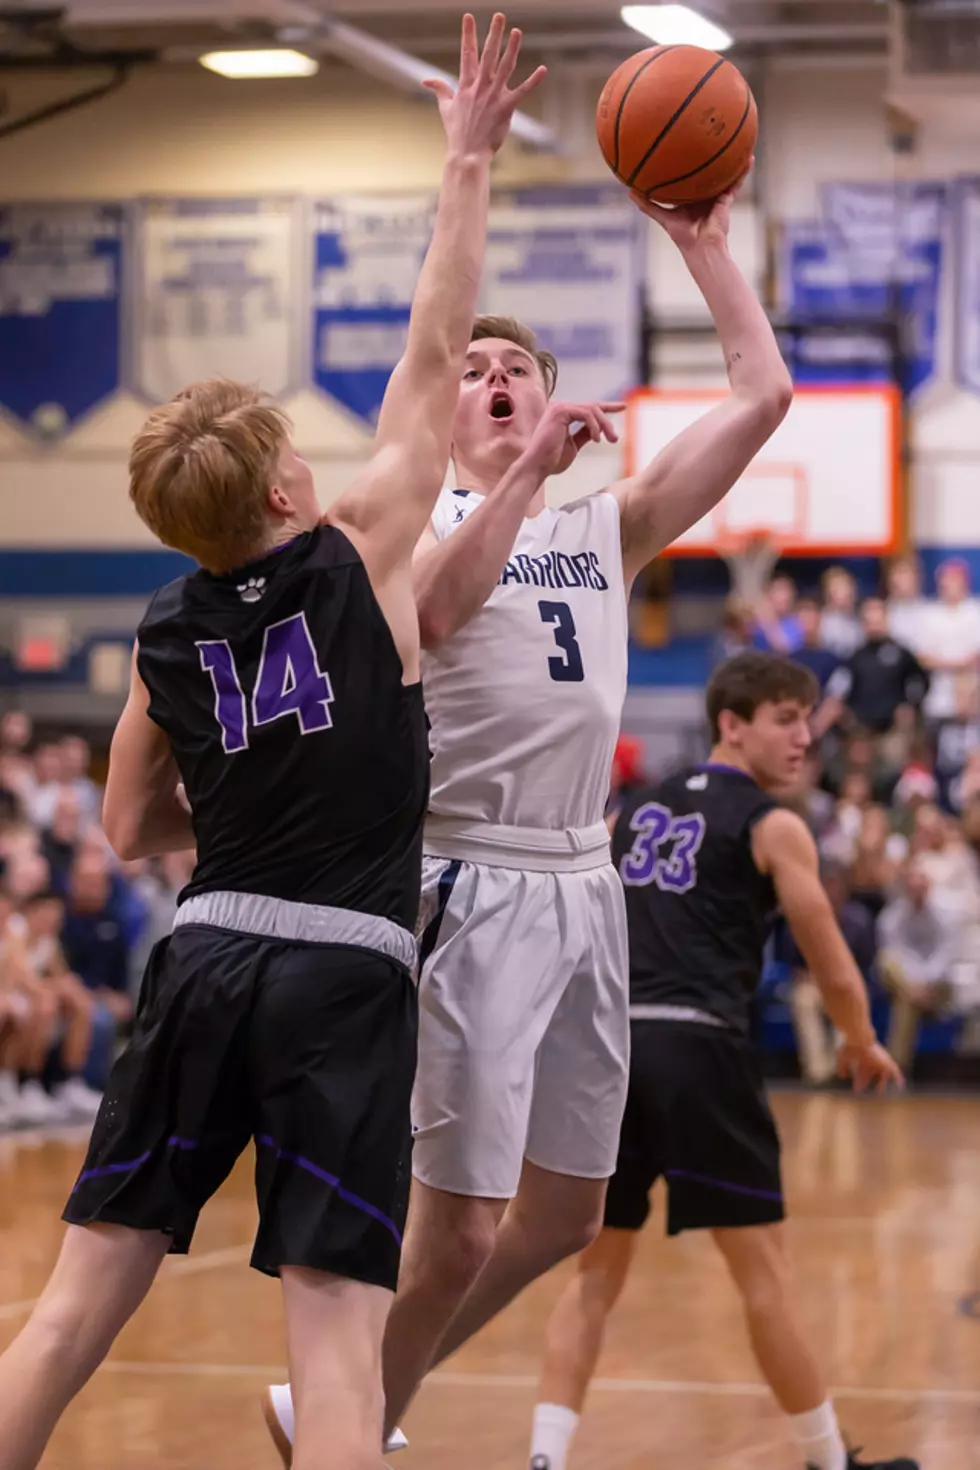 Manasquan Ends Two-Year Drought vs. Rival Rumson